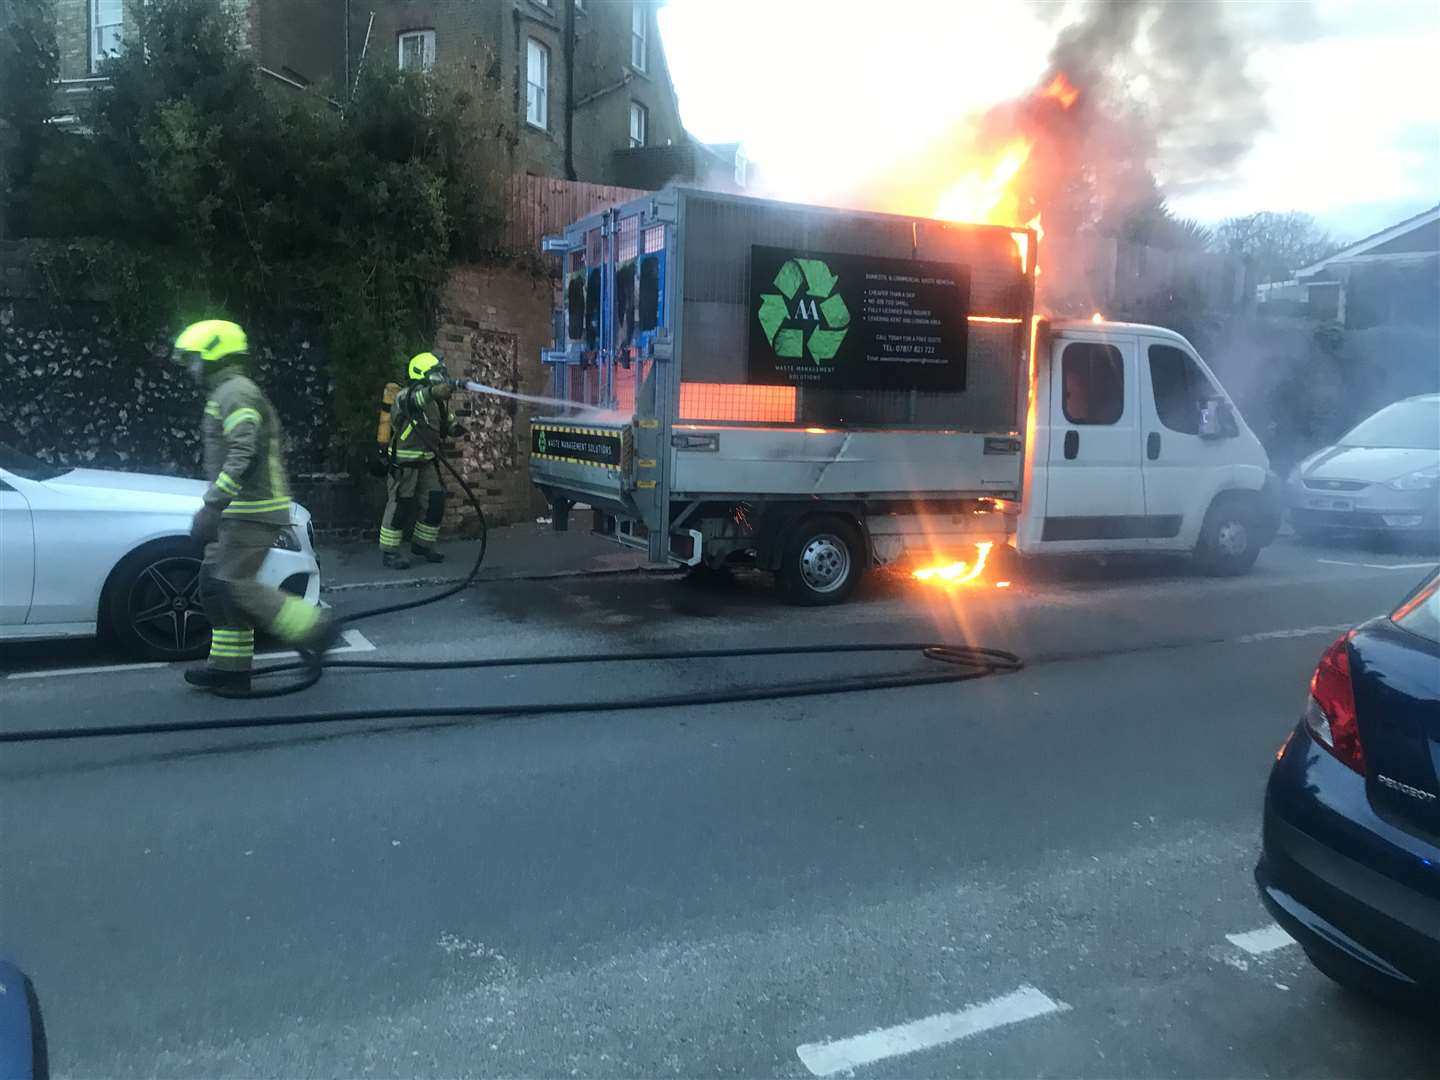 The waste management van is currently on fire in Roebuck Road, Rochester